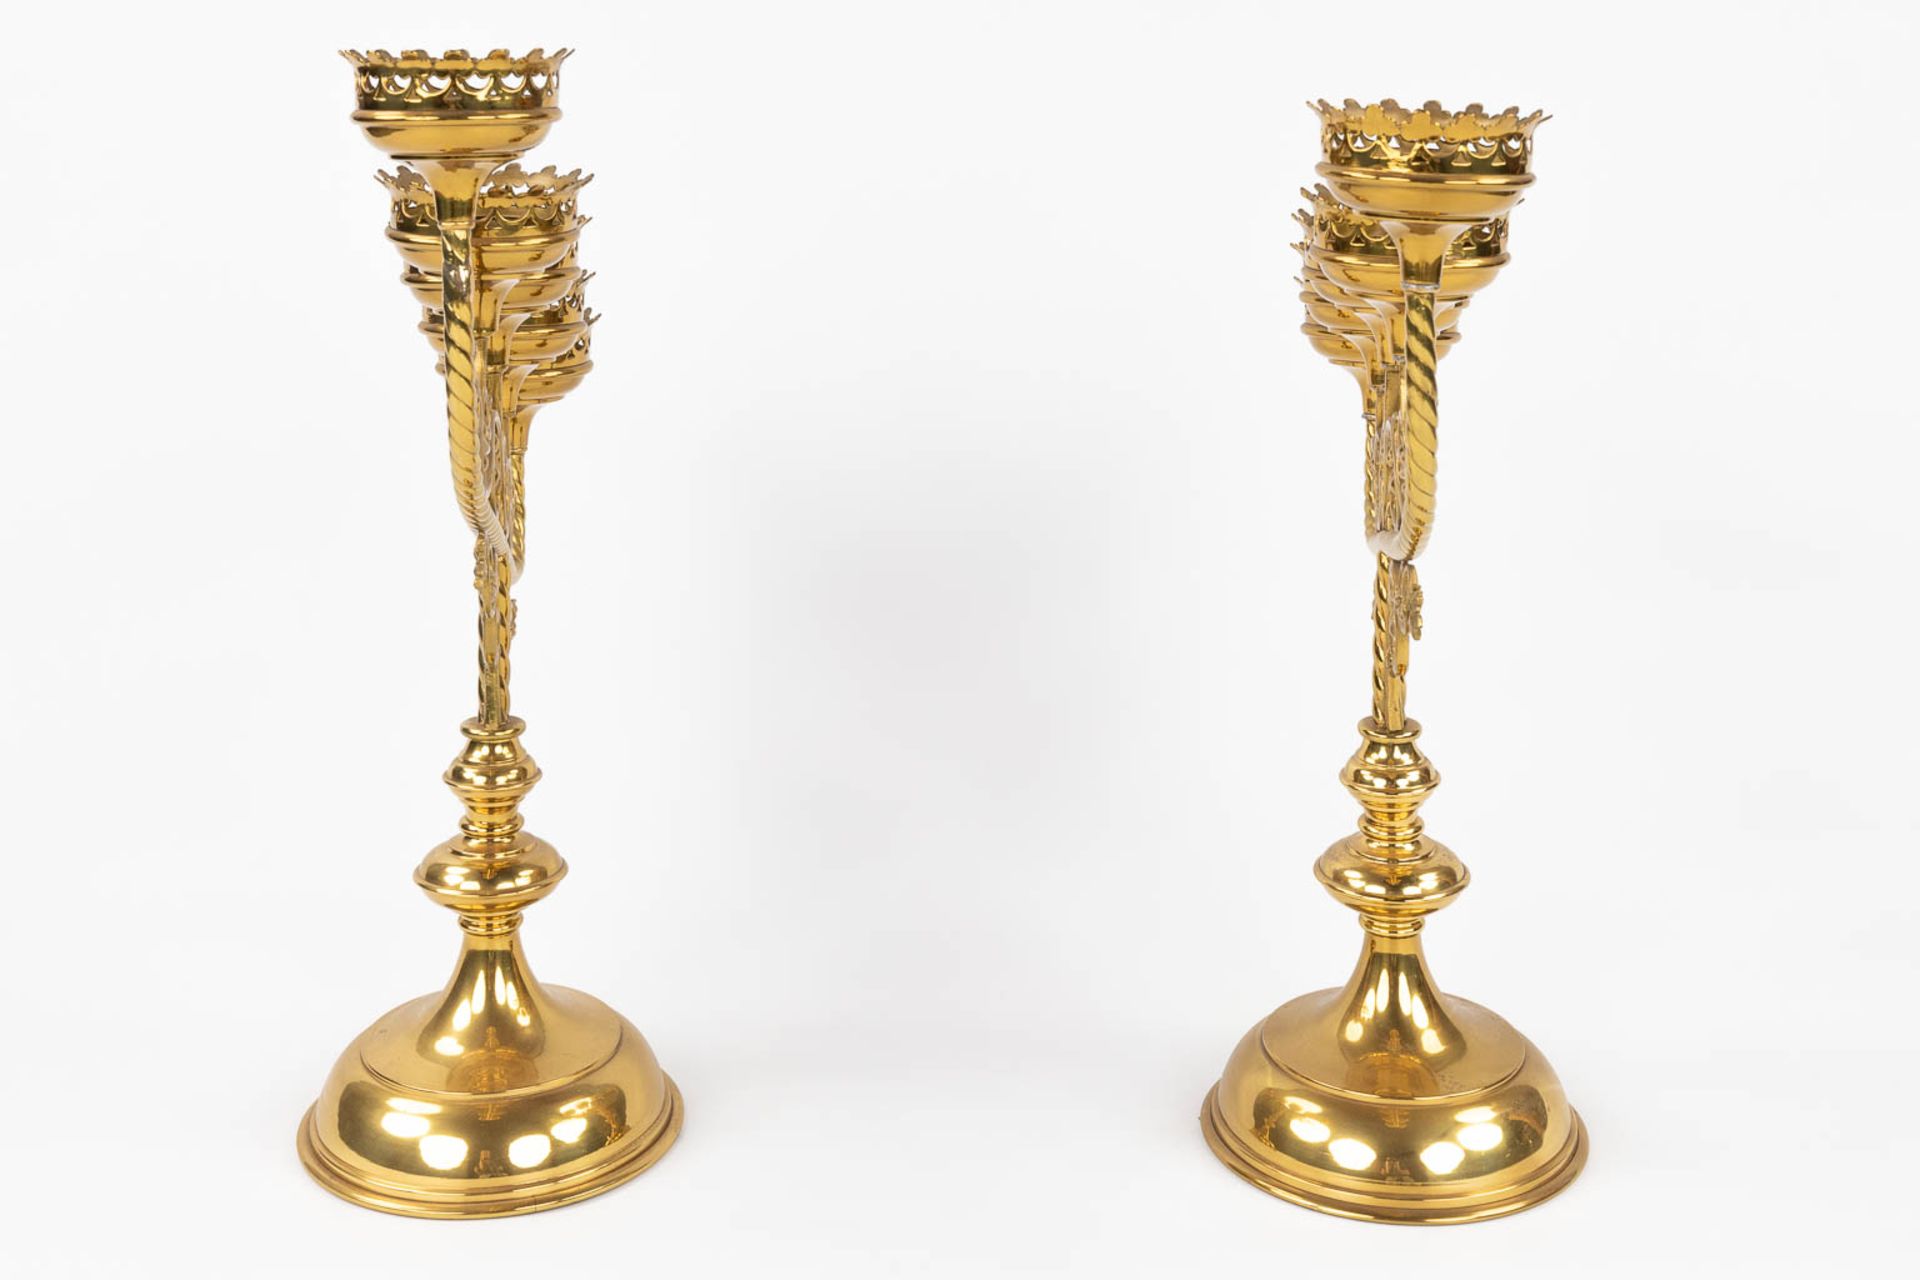 Four Church candlesticks, bronze in a gothic revival style. A pair and two singles. (D:18 x W:51 x H - Image 4 of 18